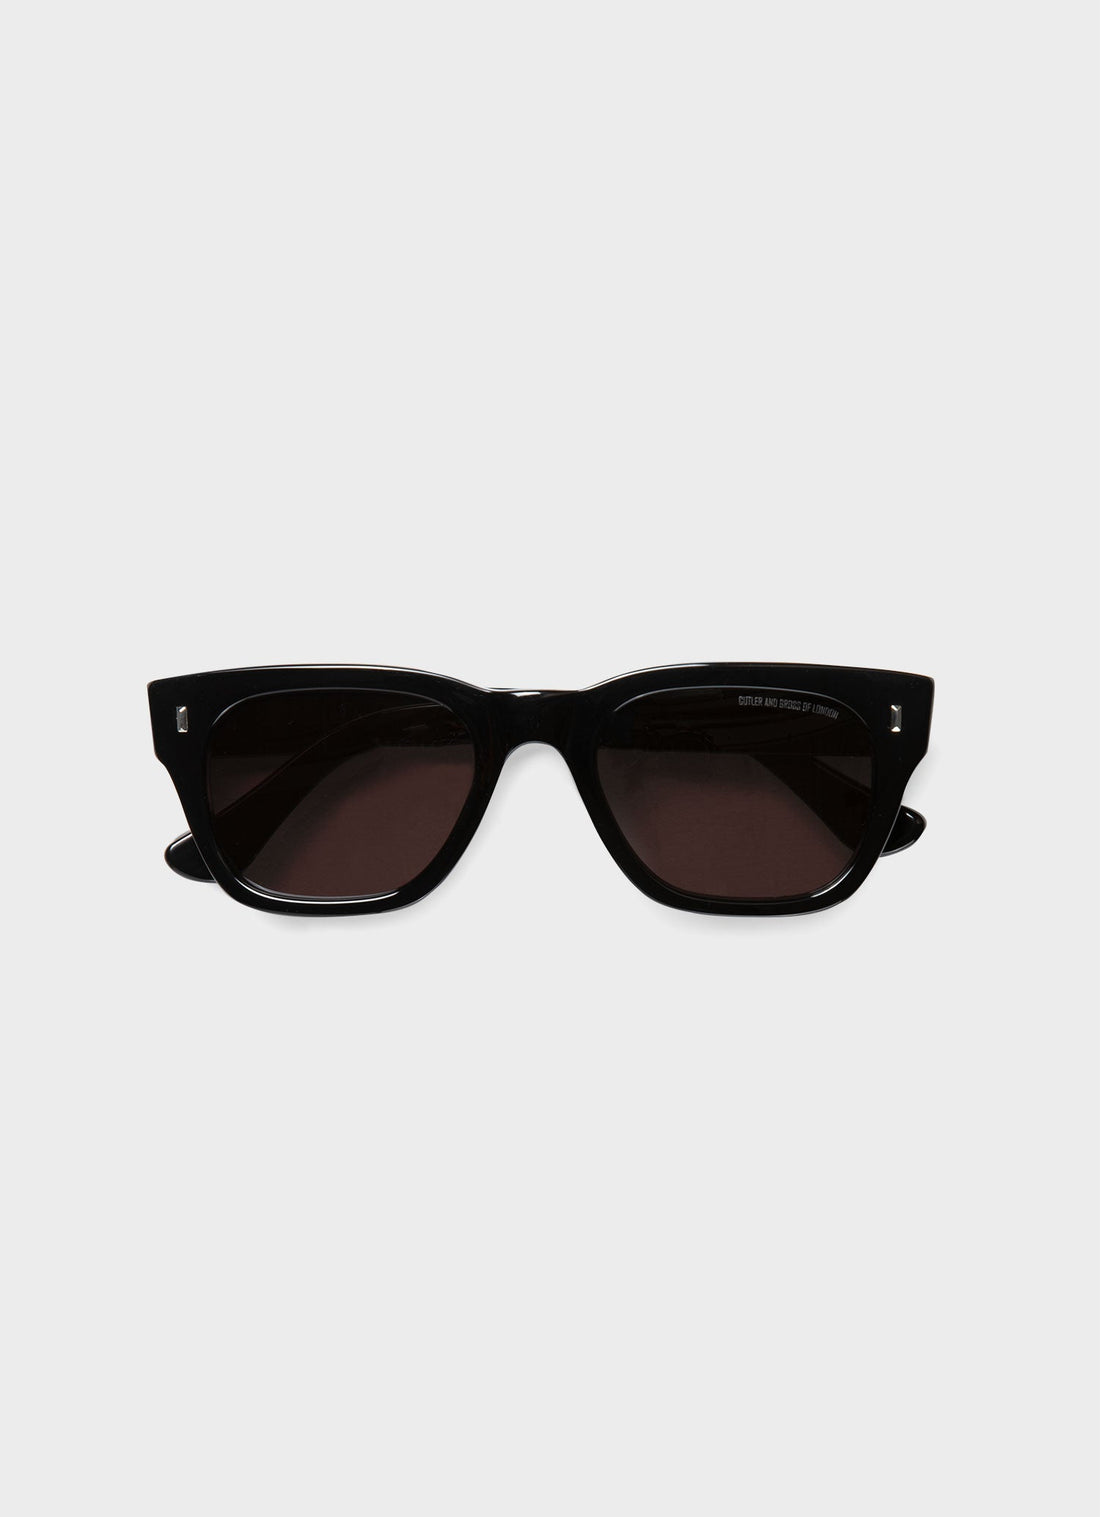 Cutler and Gross Sunglasses in Black